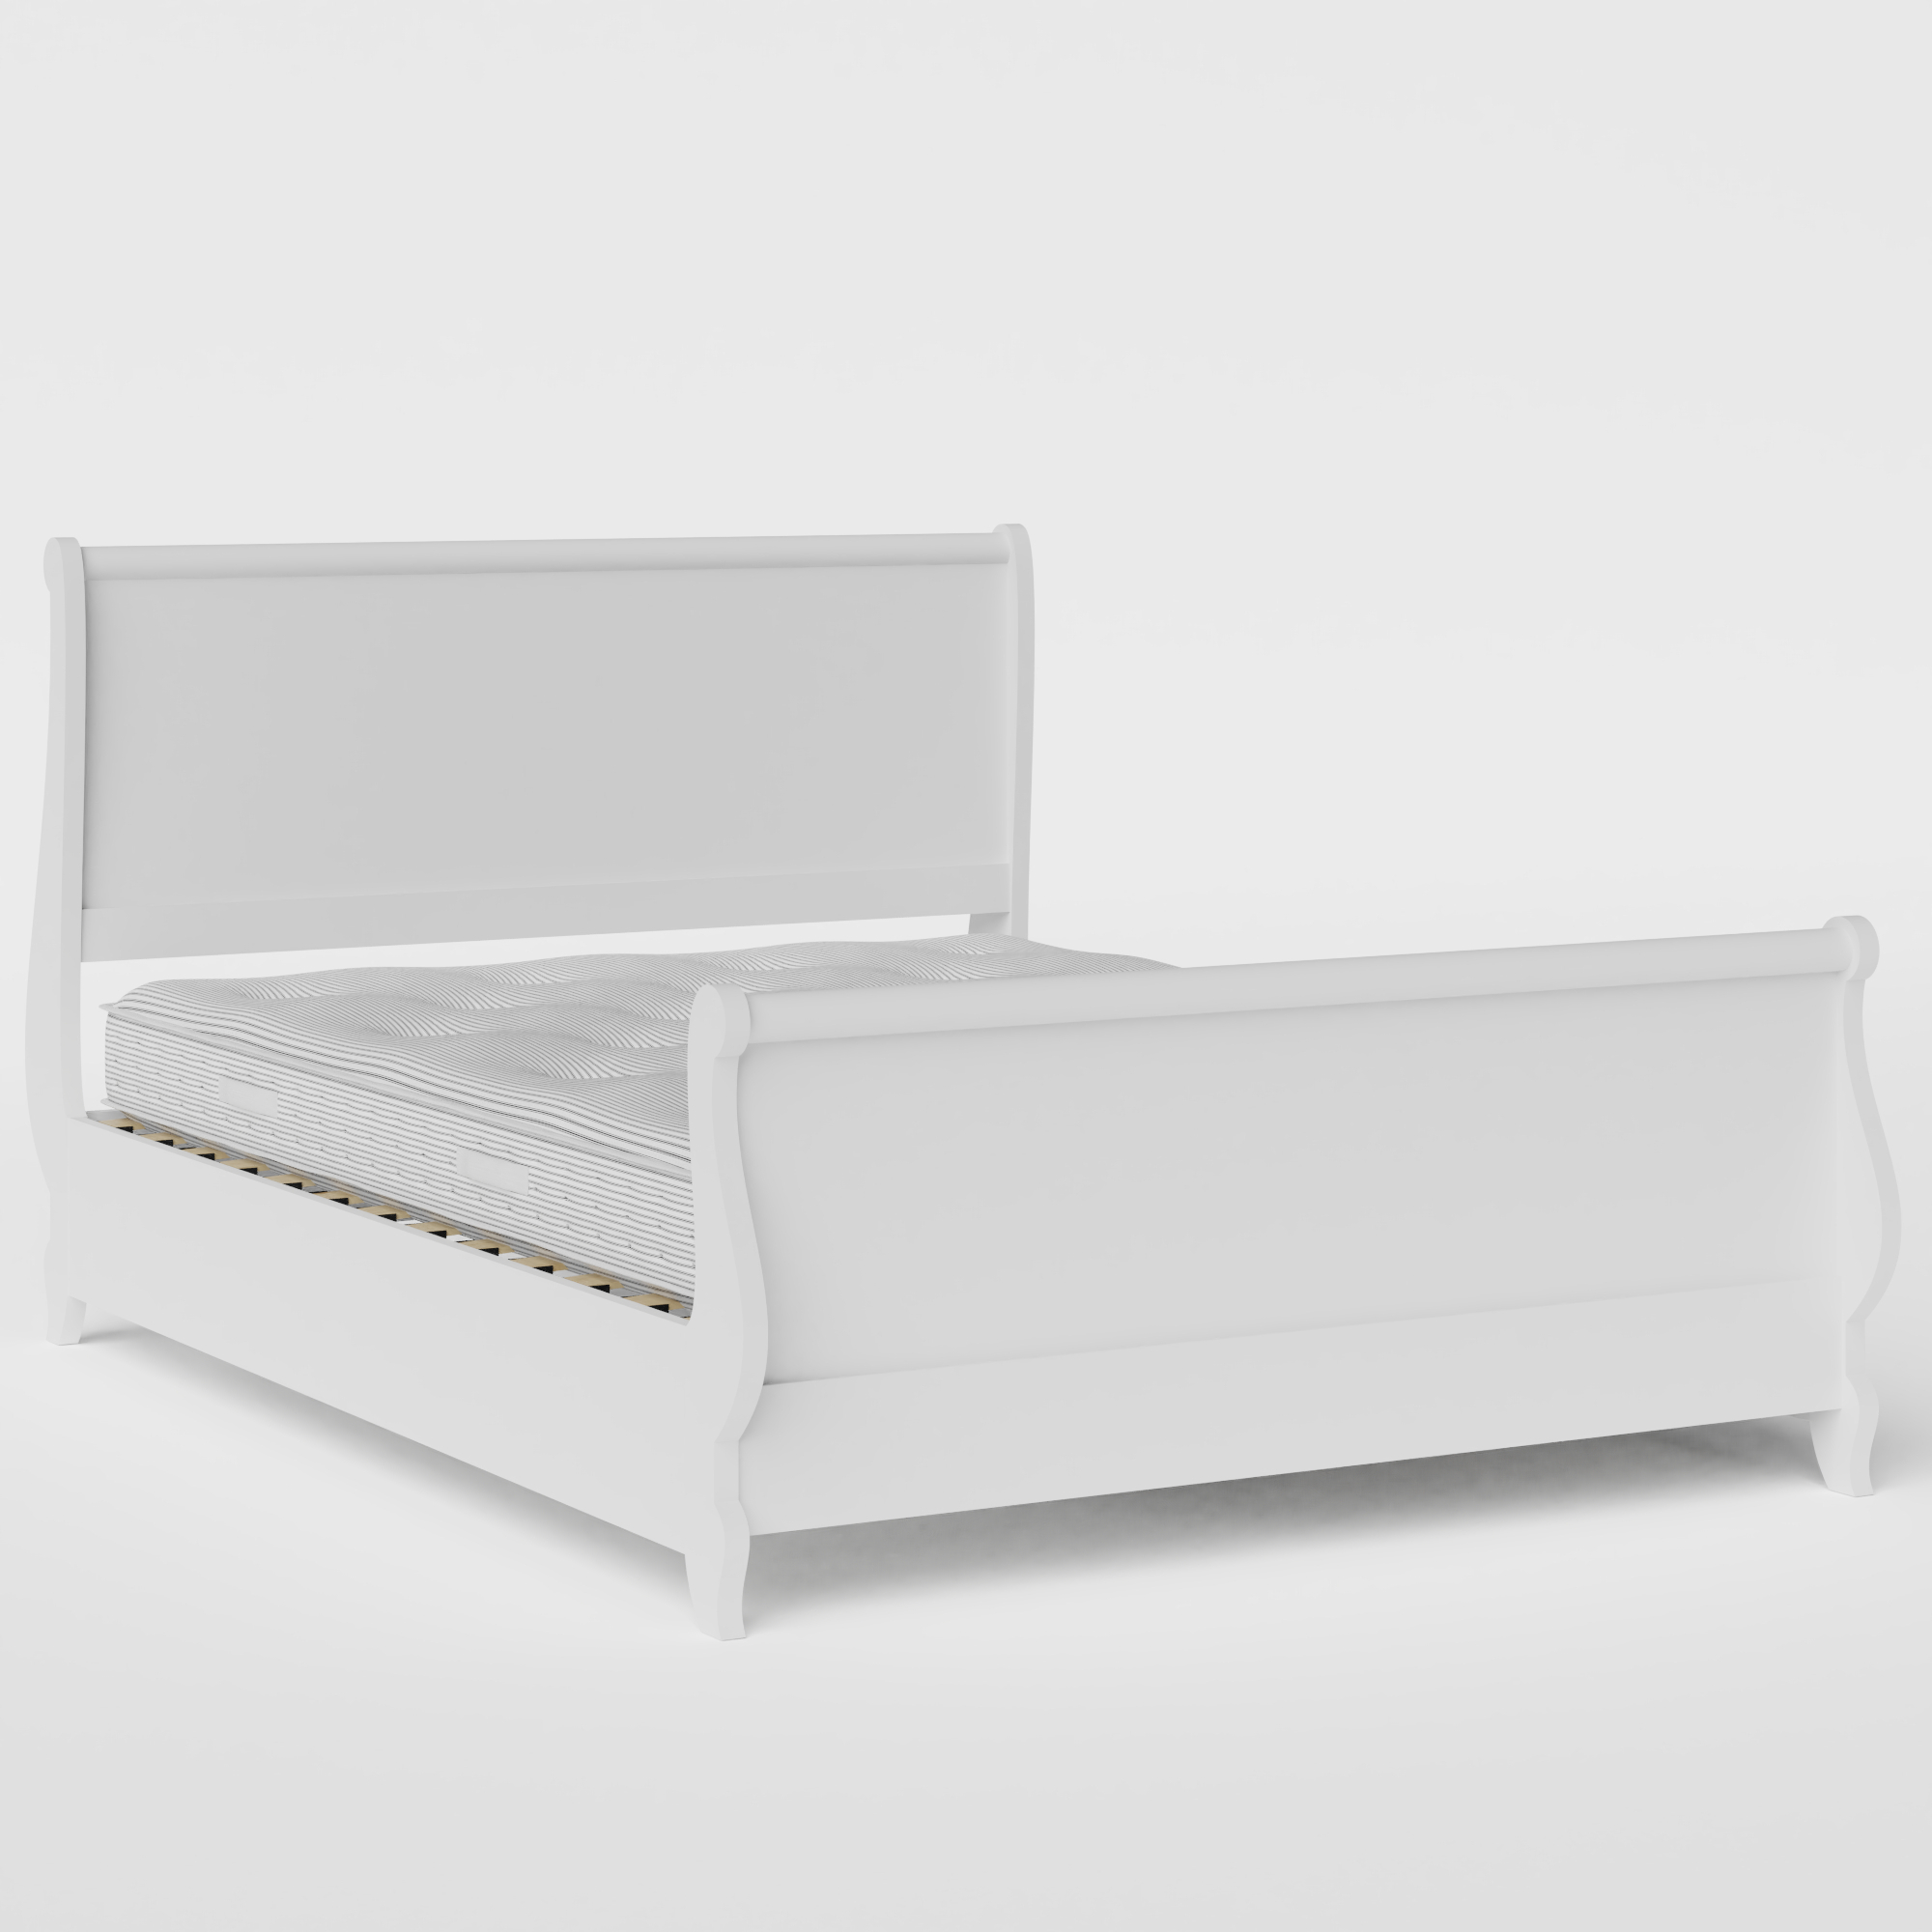 Elliot Painted painted wood bed in white with Juno mattress